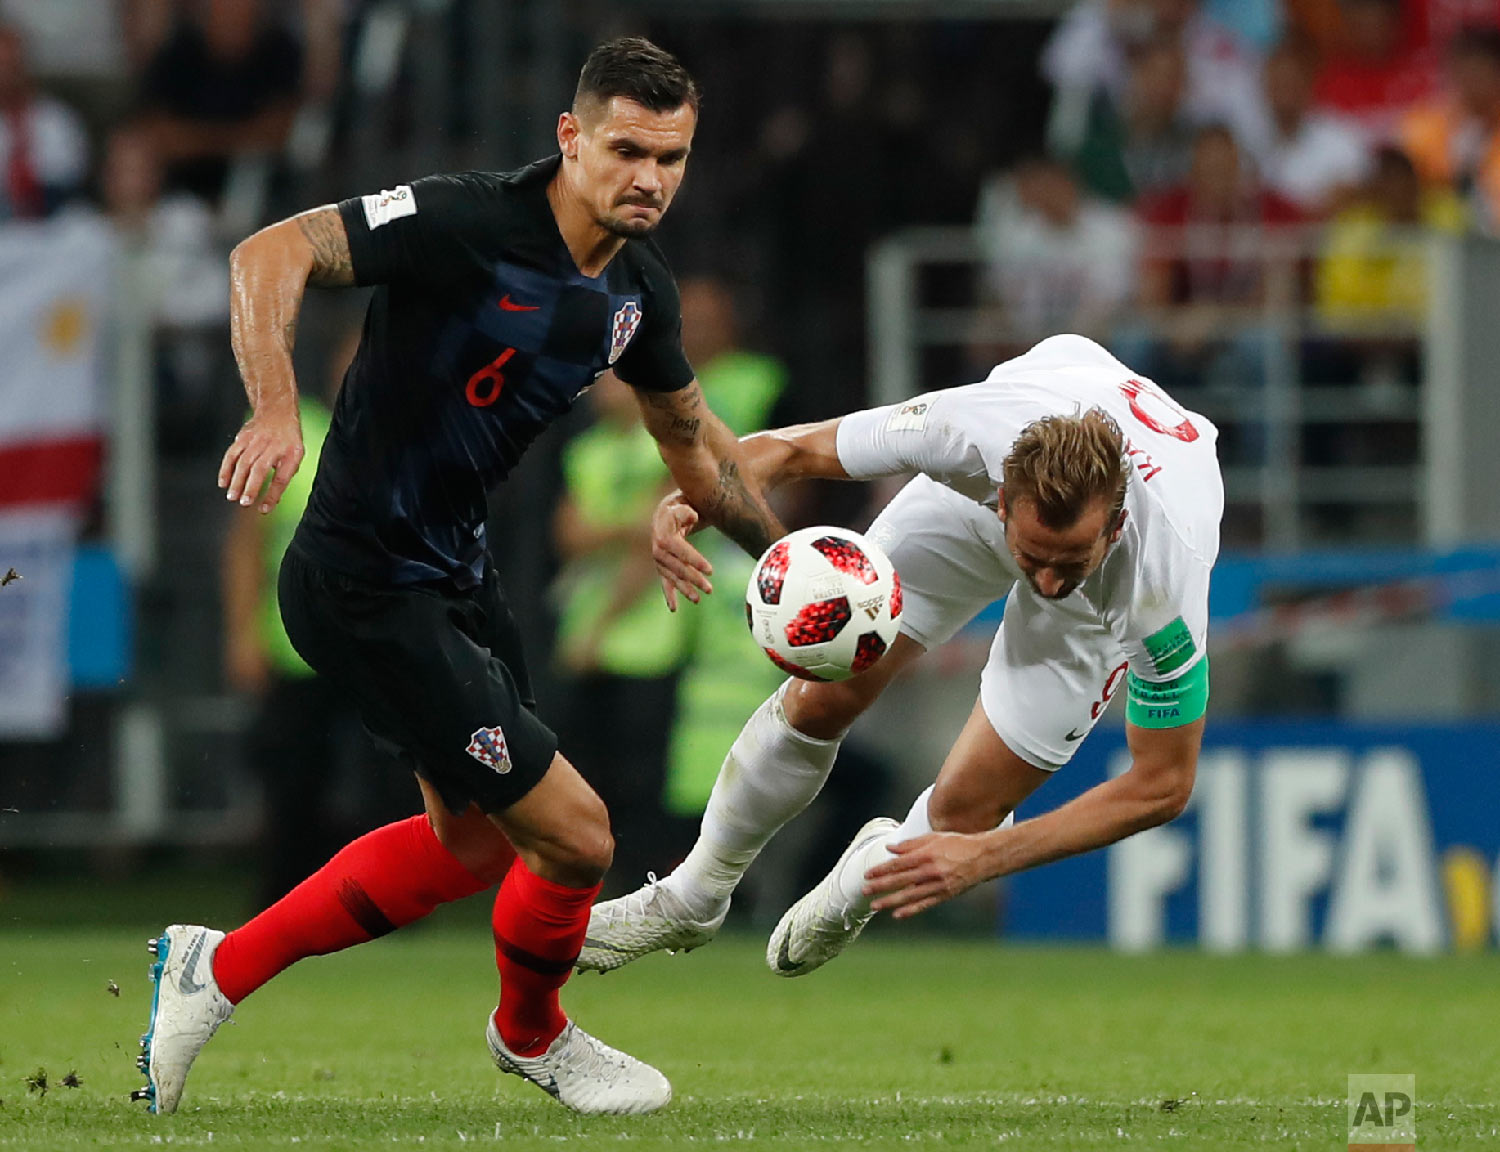  Croatia's Dejan Lovren, left, and England's Harry Kane challenge for the ball during the semifinal match between Croatia and England at the 2018 soccer World Cup in the Luzhniki Stadium in, Moscow, Russia, Wednesday, July 11, 2018. (AP Photo/Alastai